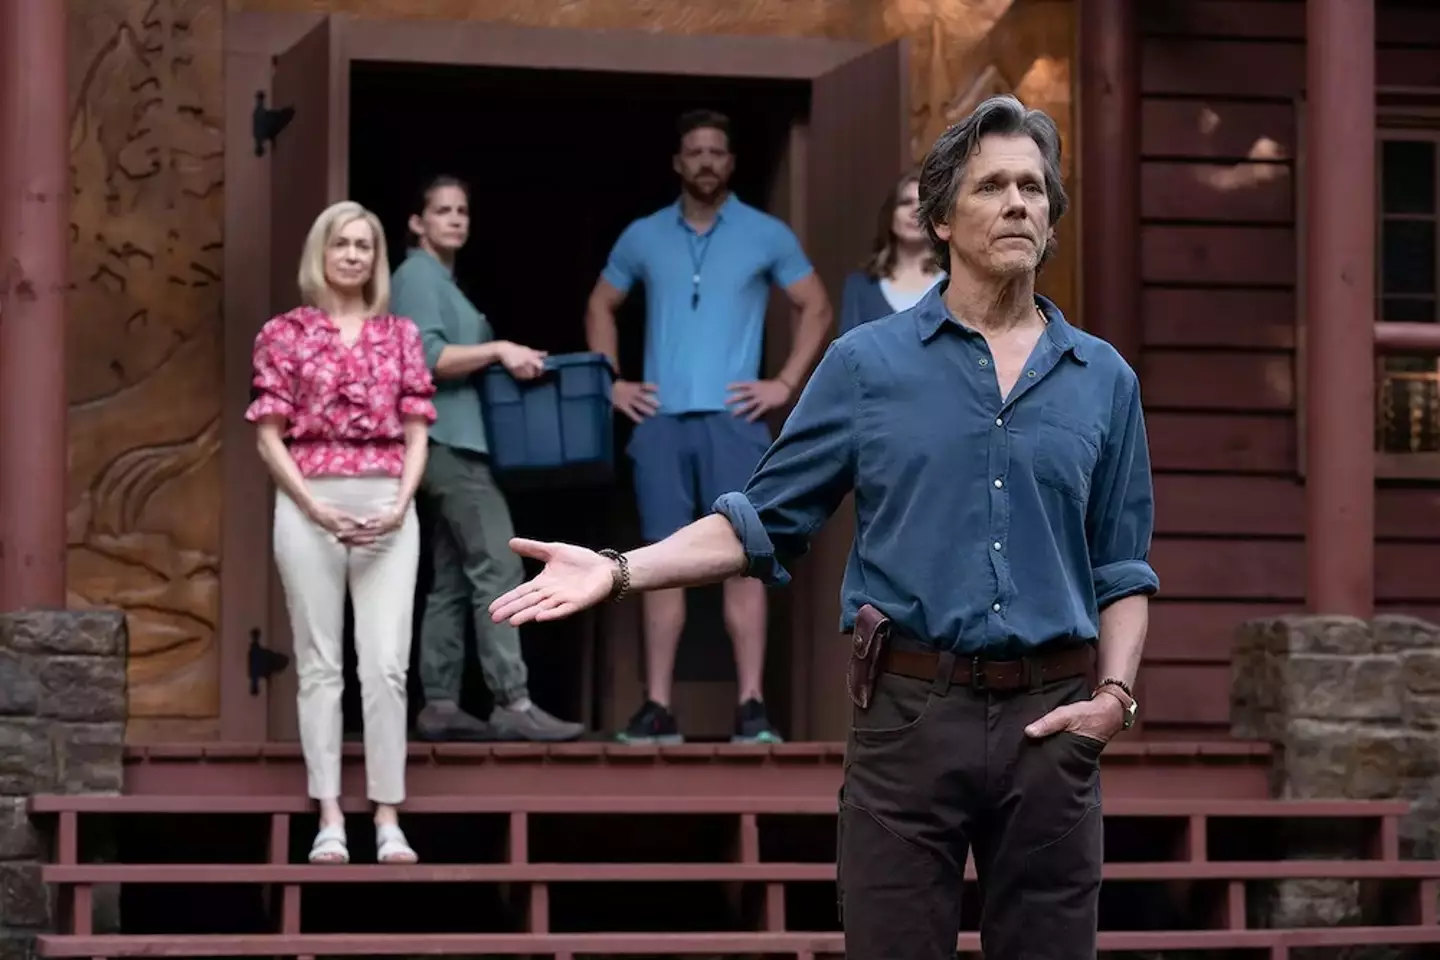 Kevin Bacon stars as the director of the conversion therapy camp.